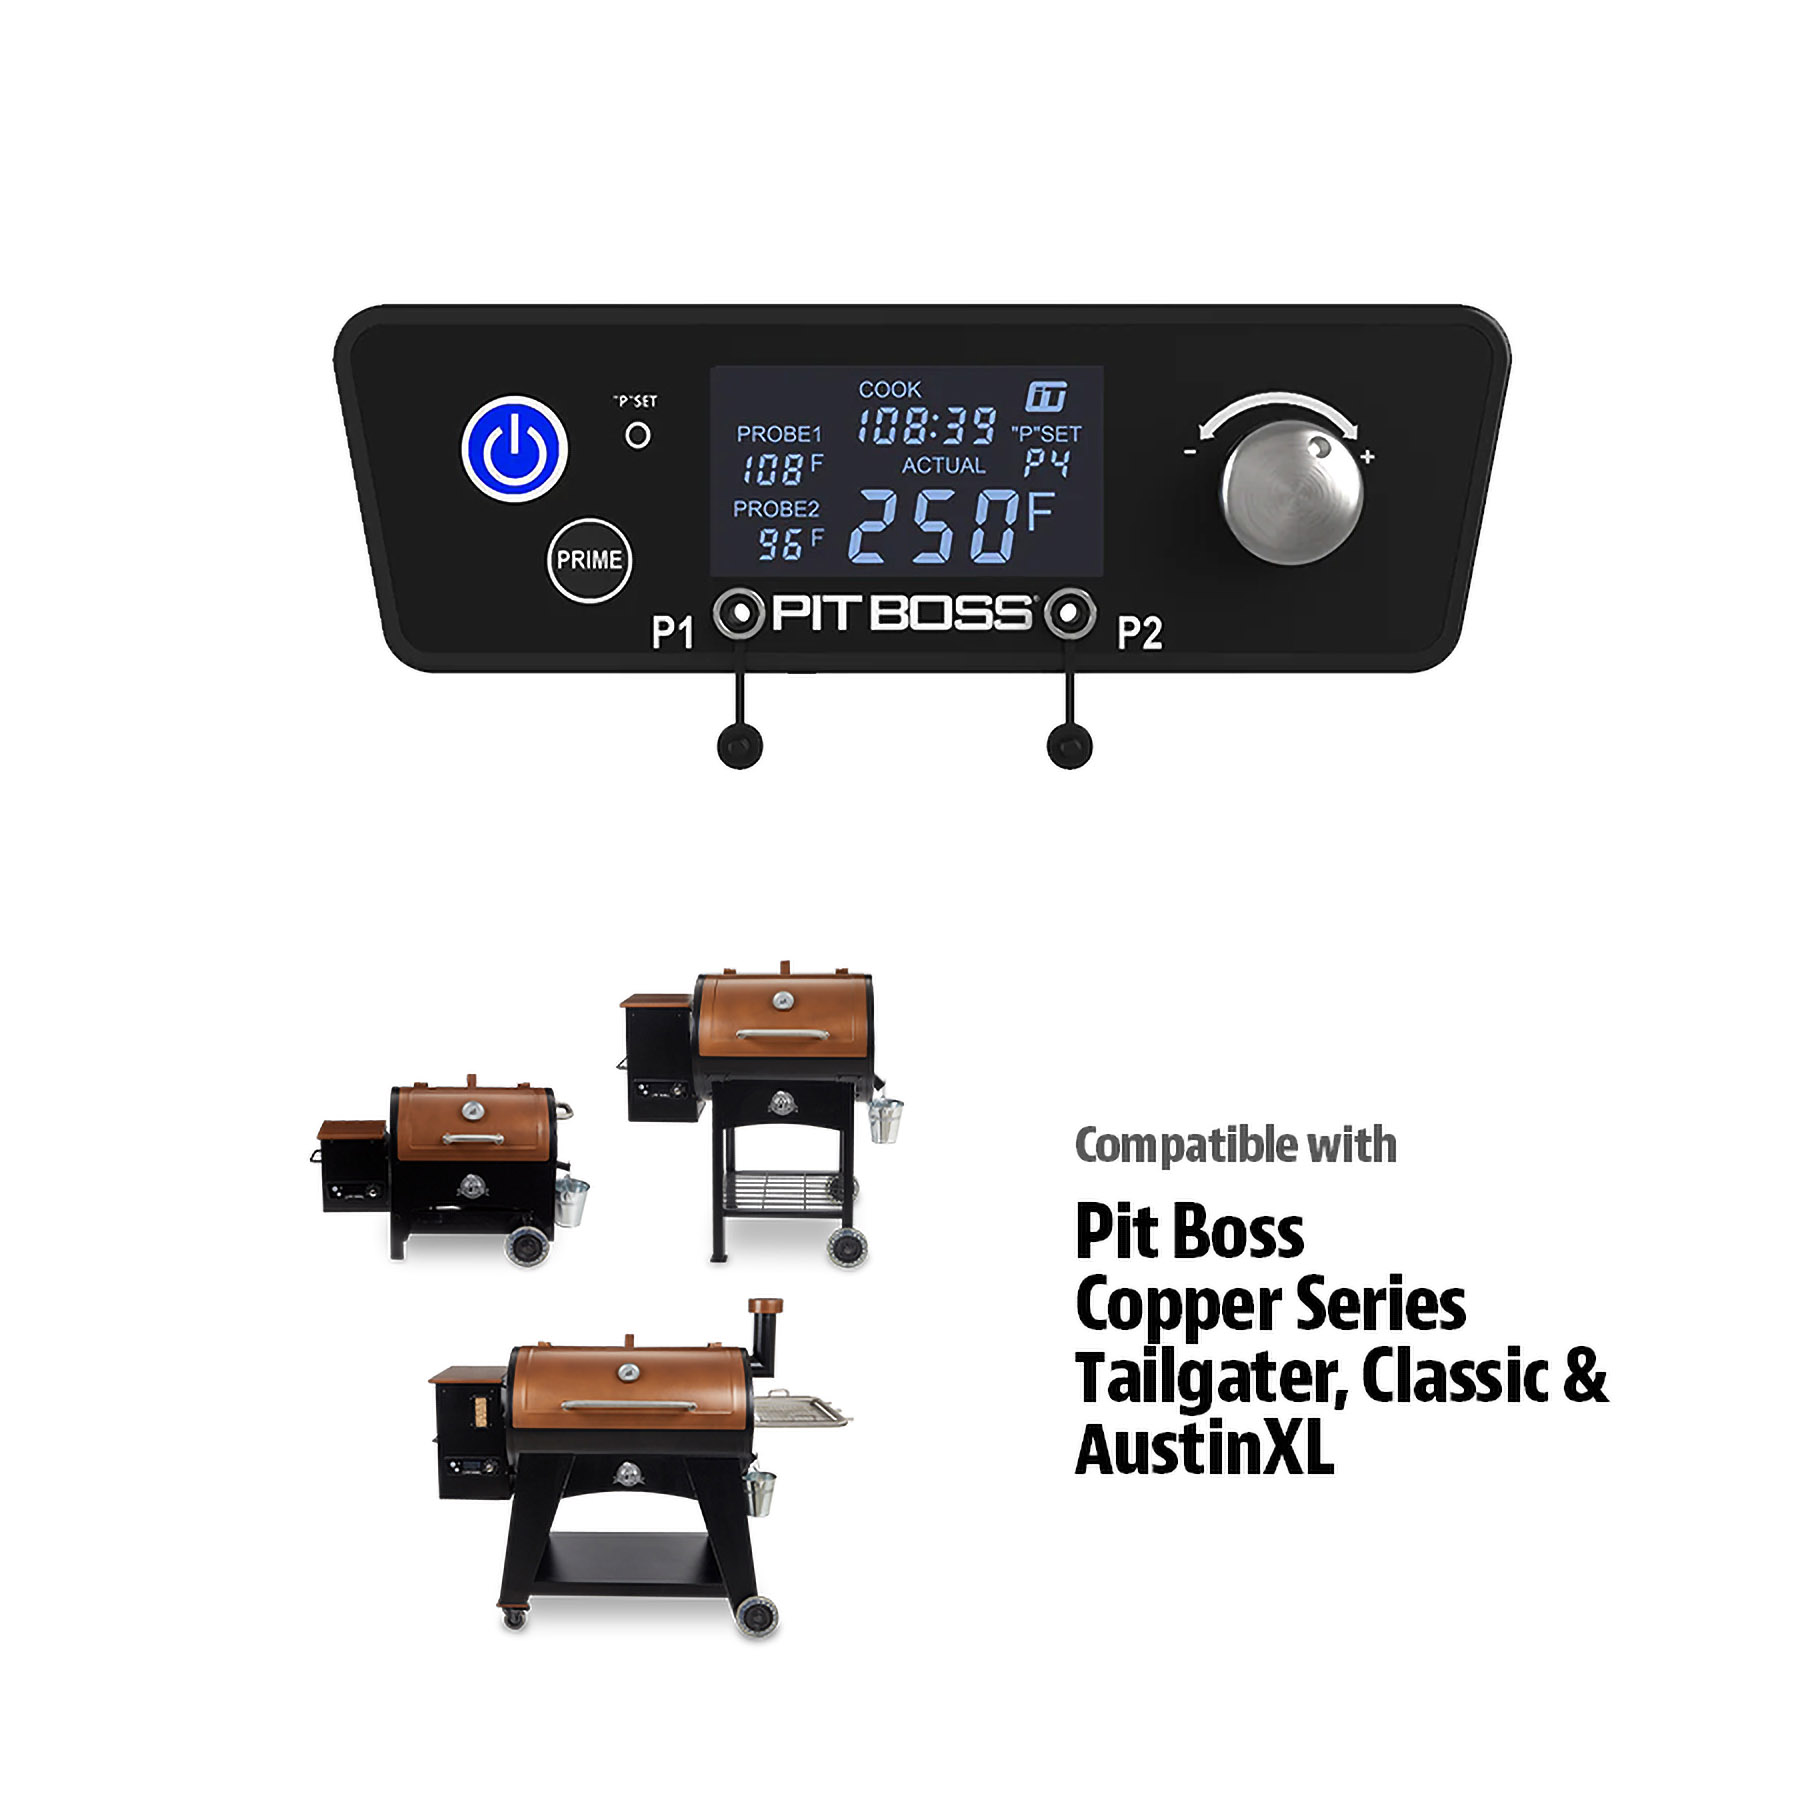 Pit Boss Legacy Wi-Fi® and Bluetooth® Controller - Grill Attachment, Copper Series - image 2 of 3